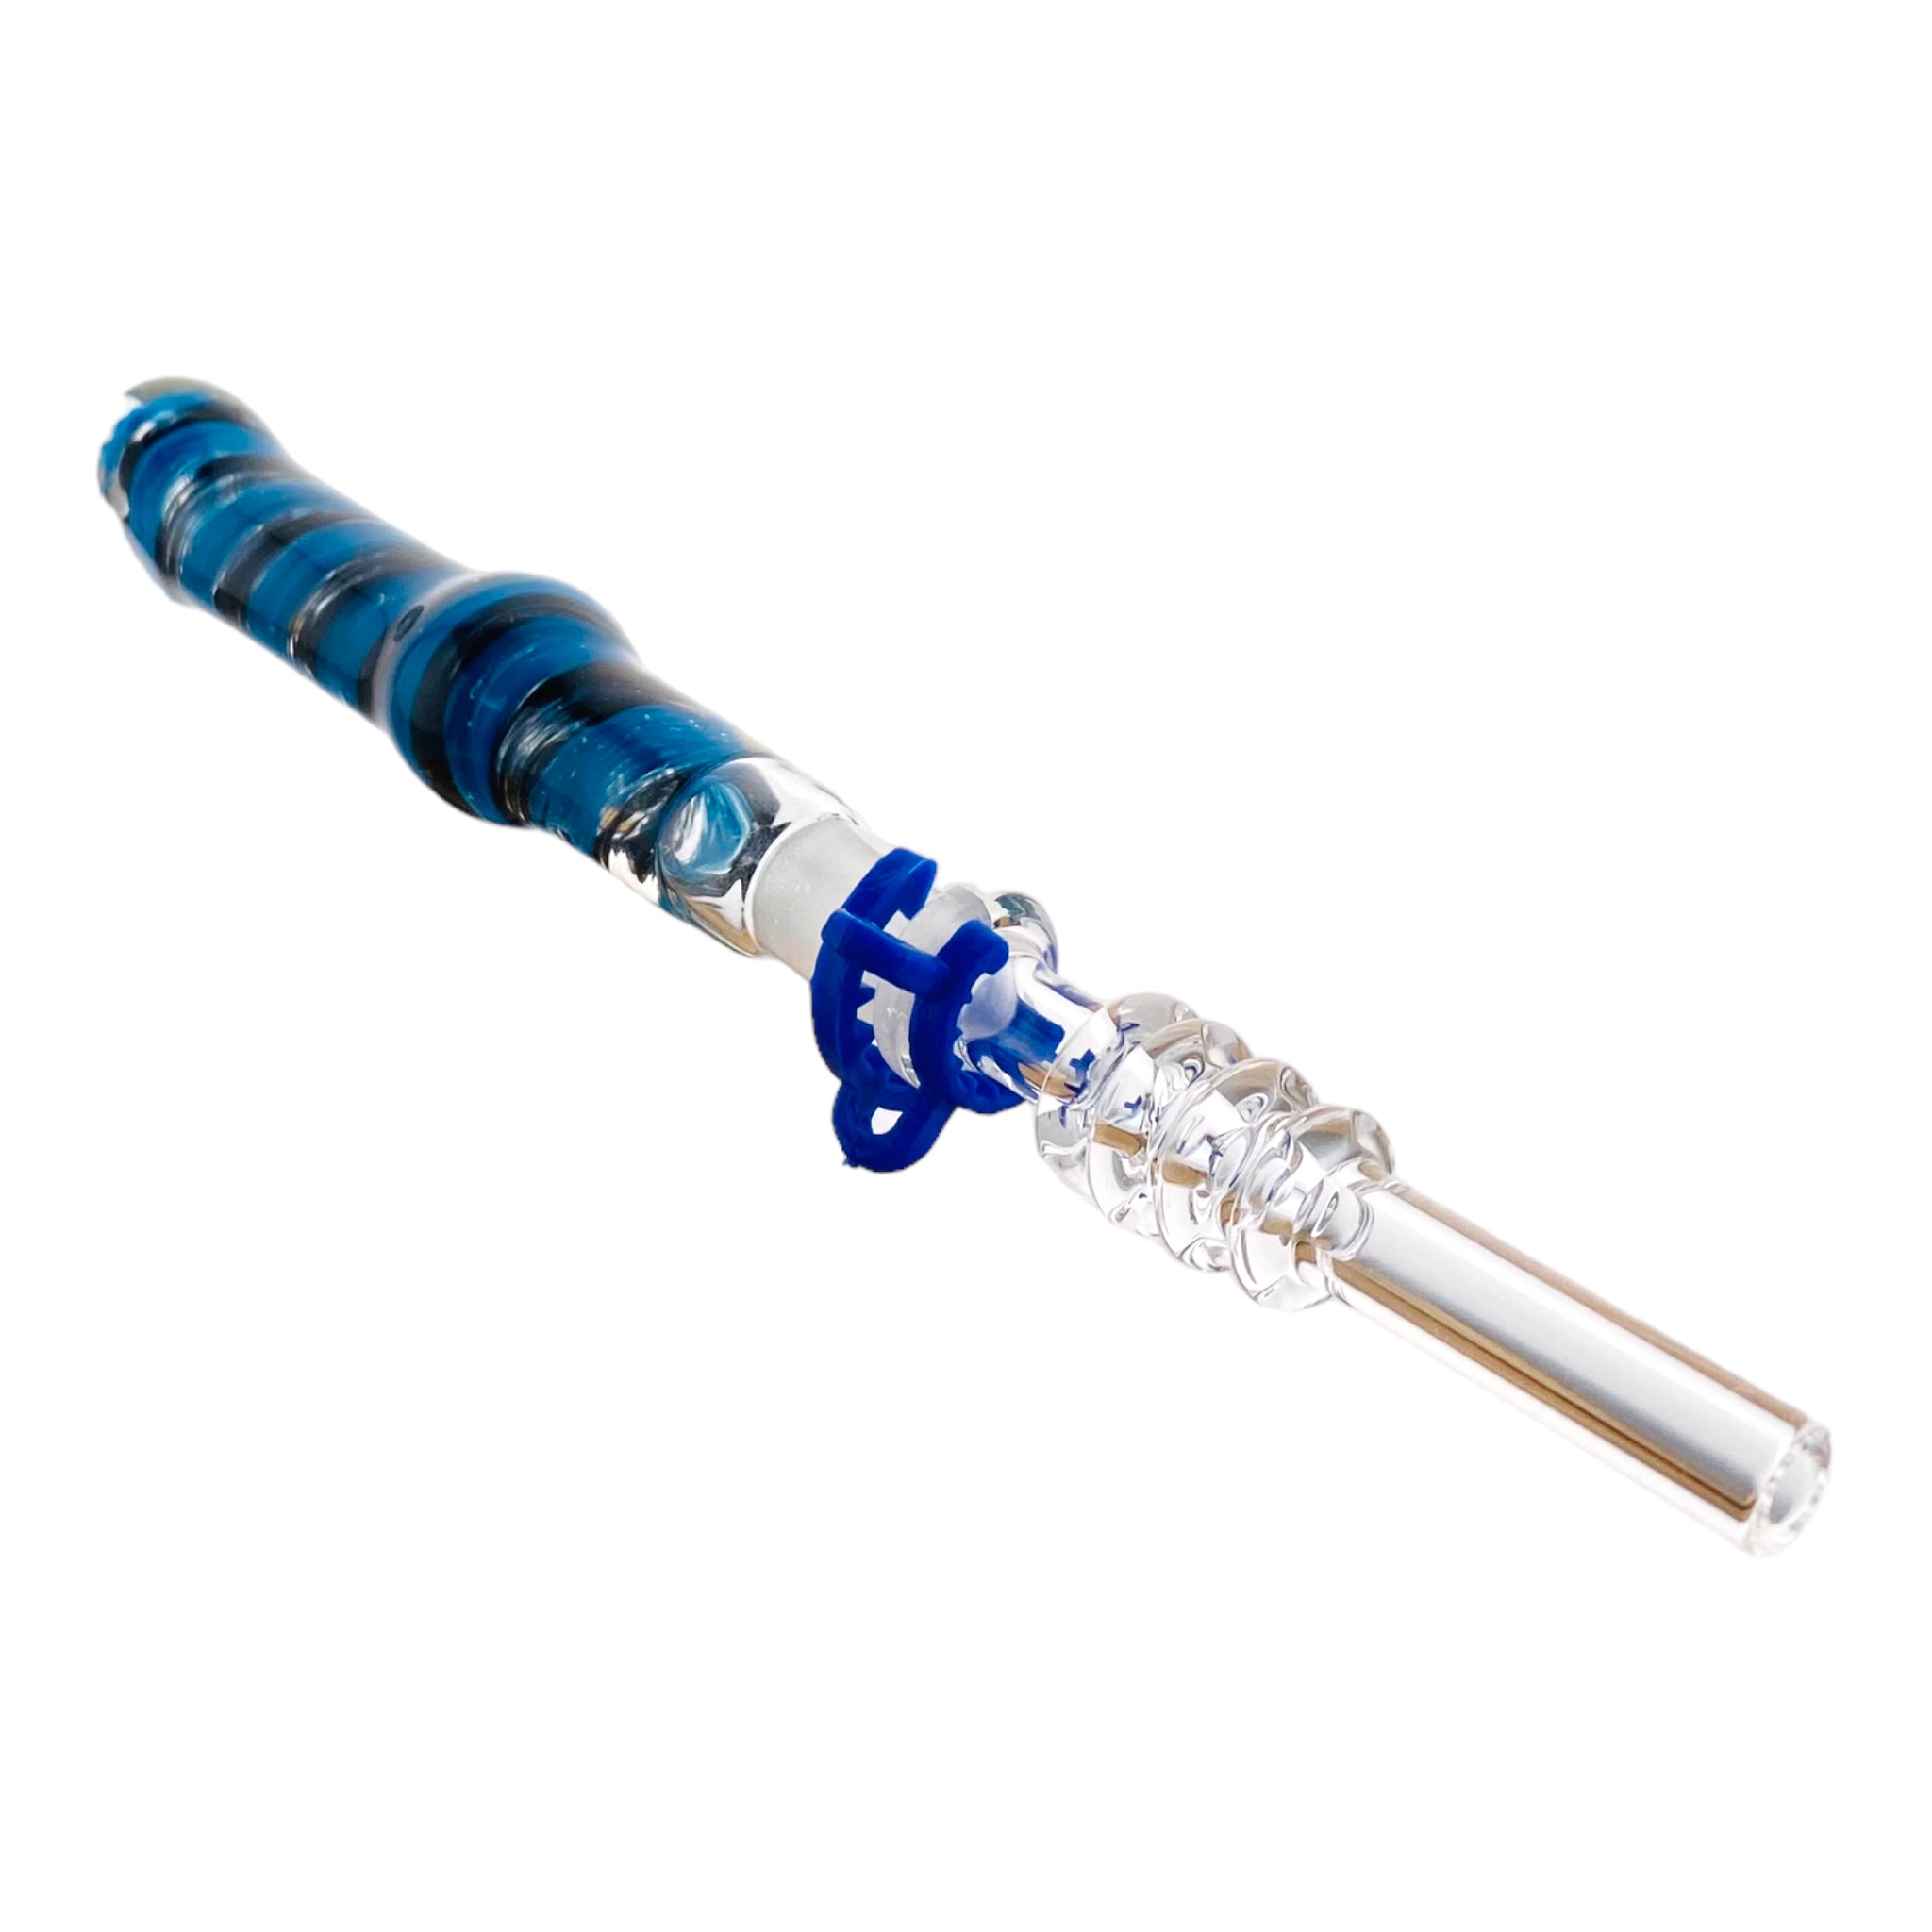 10mm Nectar Collector - Blue And Black Inside Out With 10mm Quartz Tip